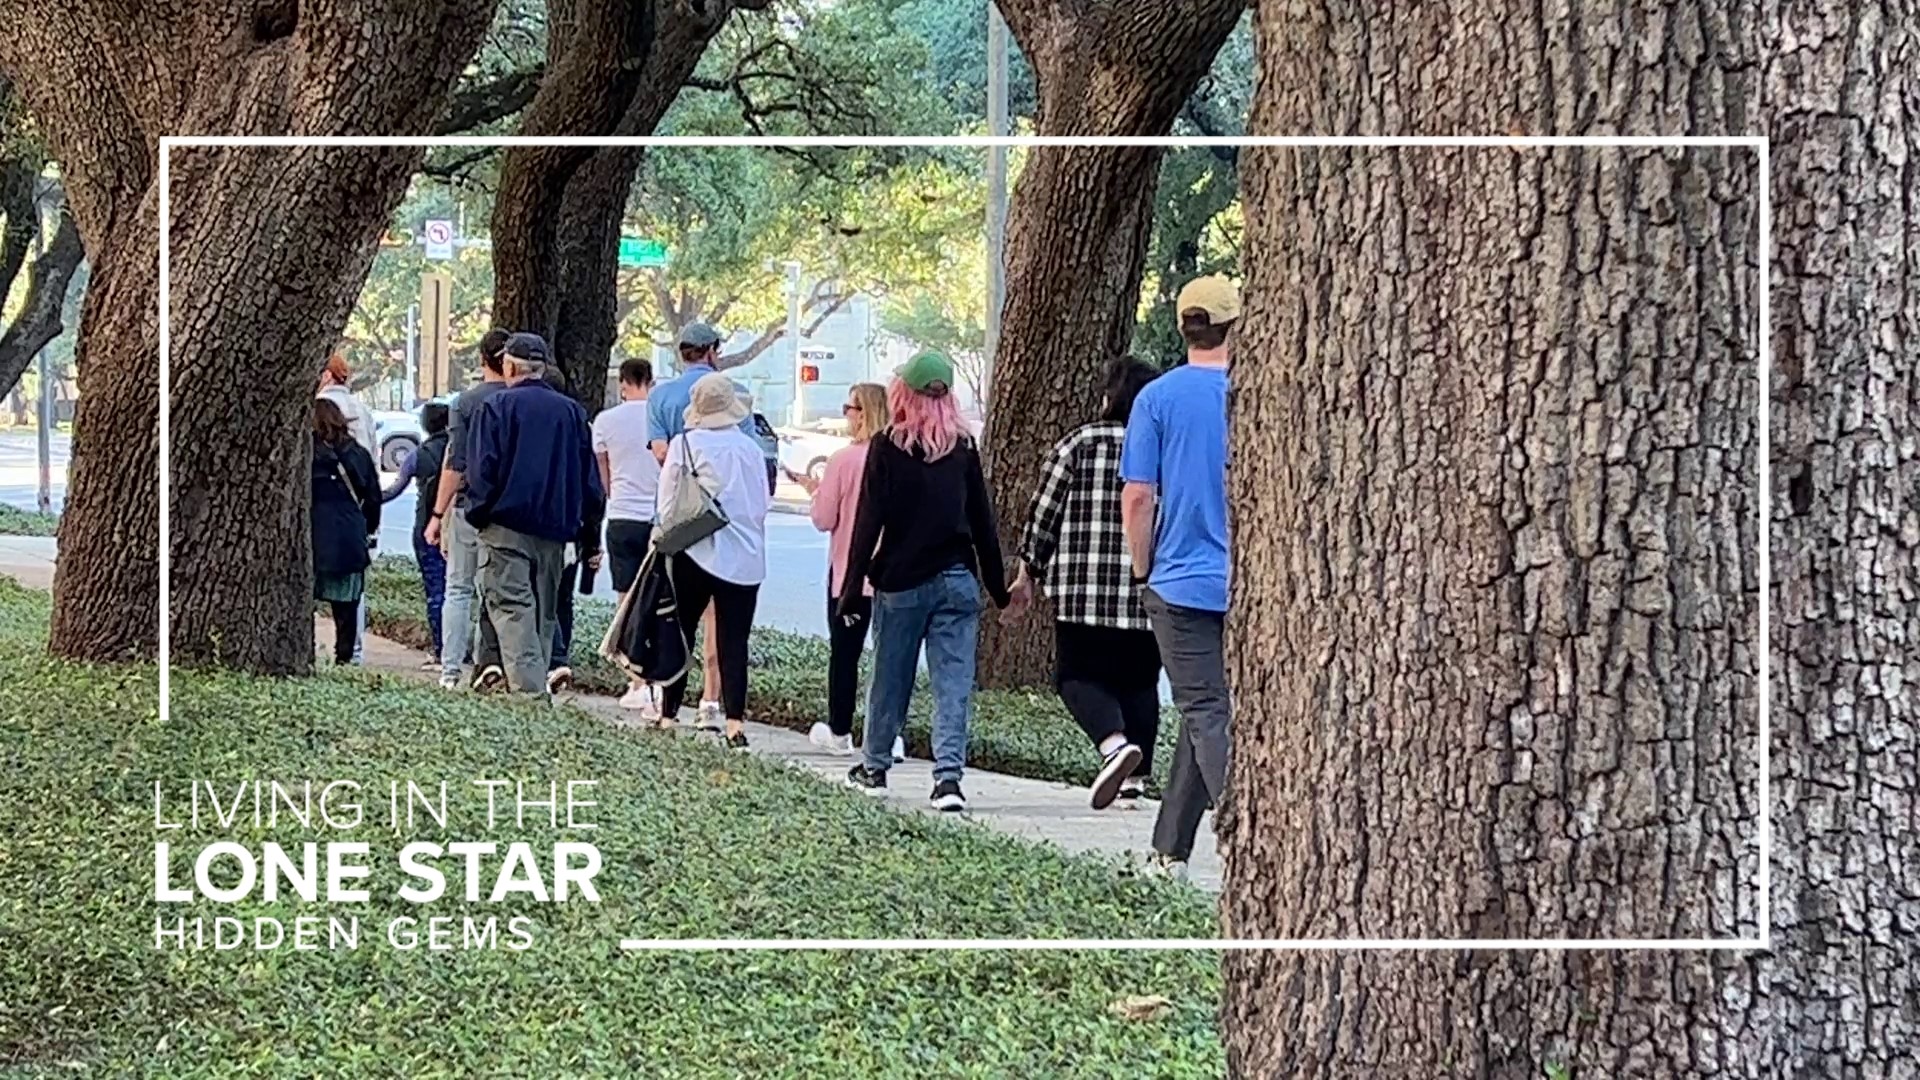 ArCH volunteer docents lead tourgoers through different Houston neighborhoods, sharing about architecture and history.